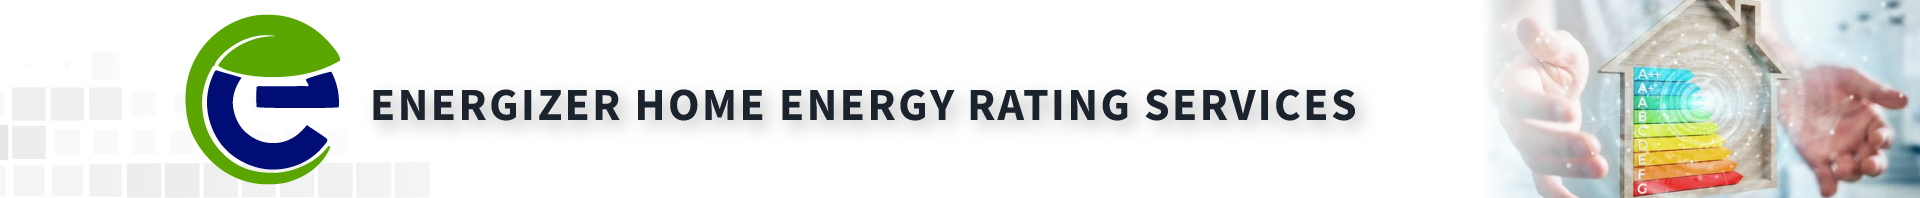 header - Energizer Home Energy Rating Services